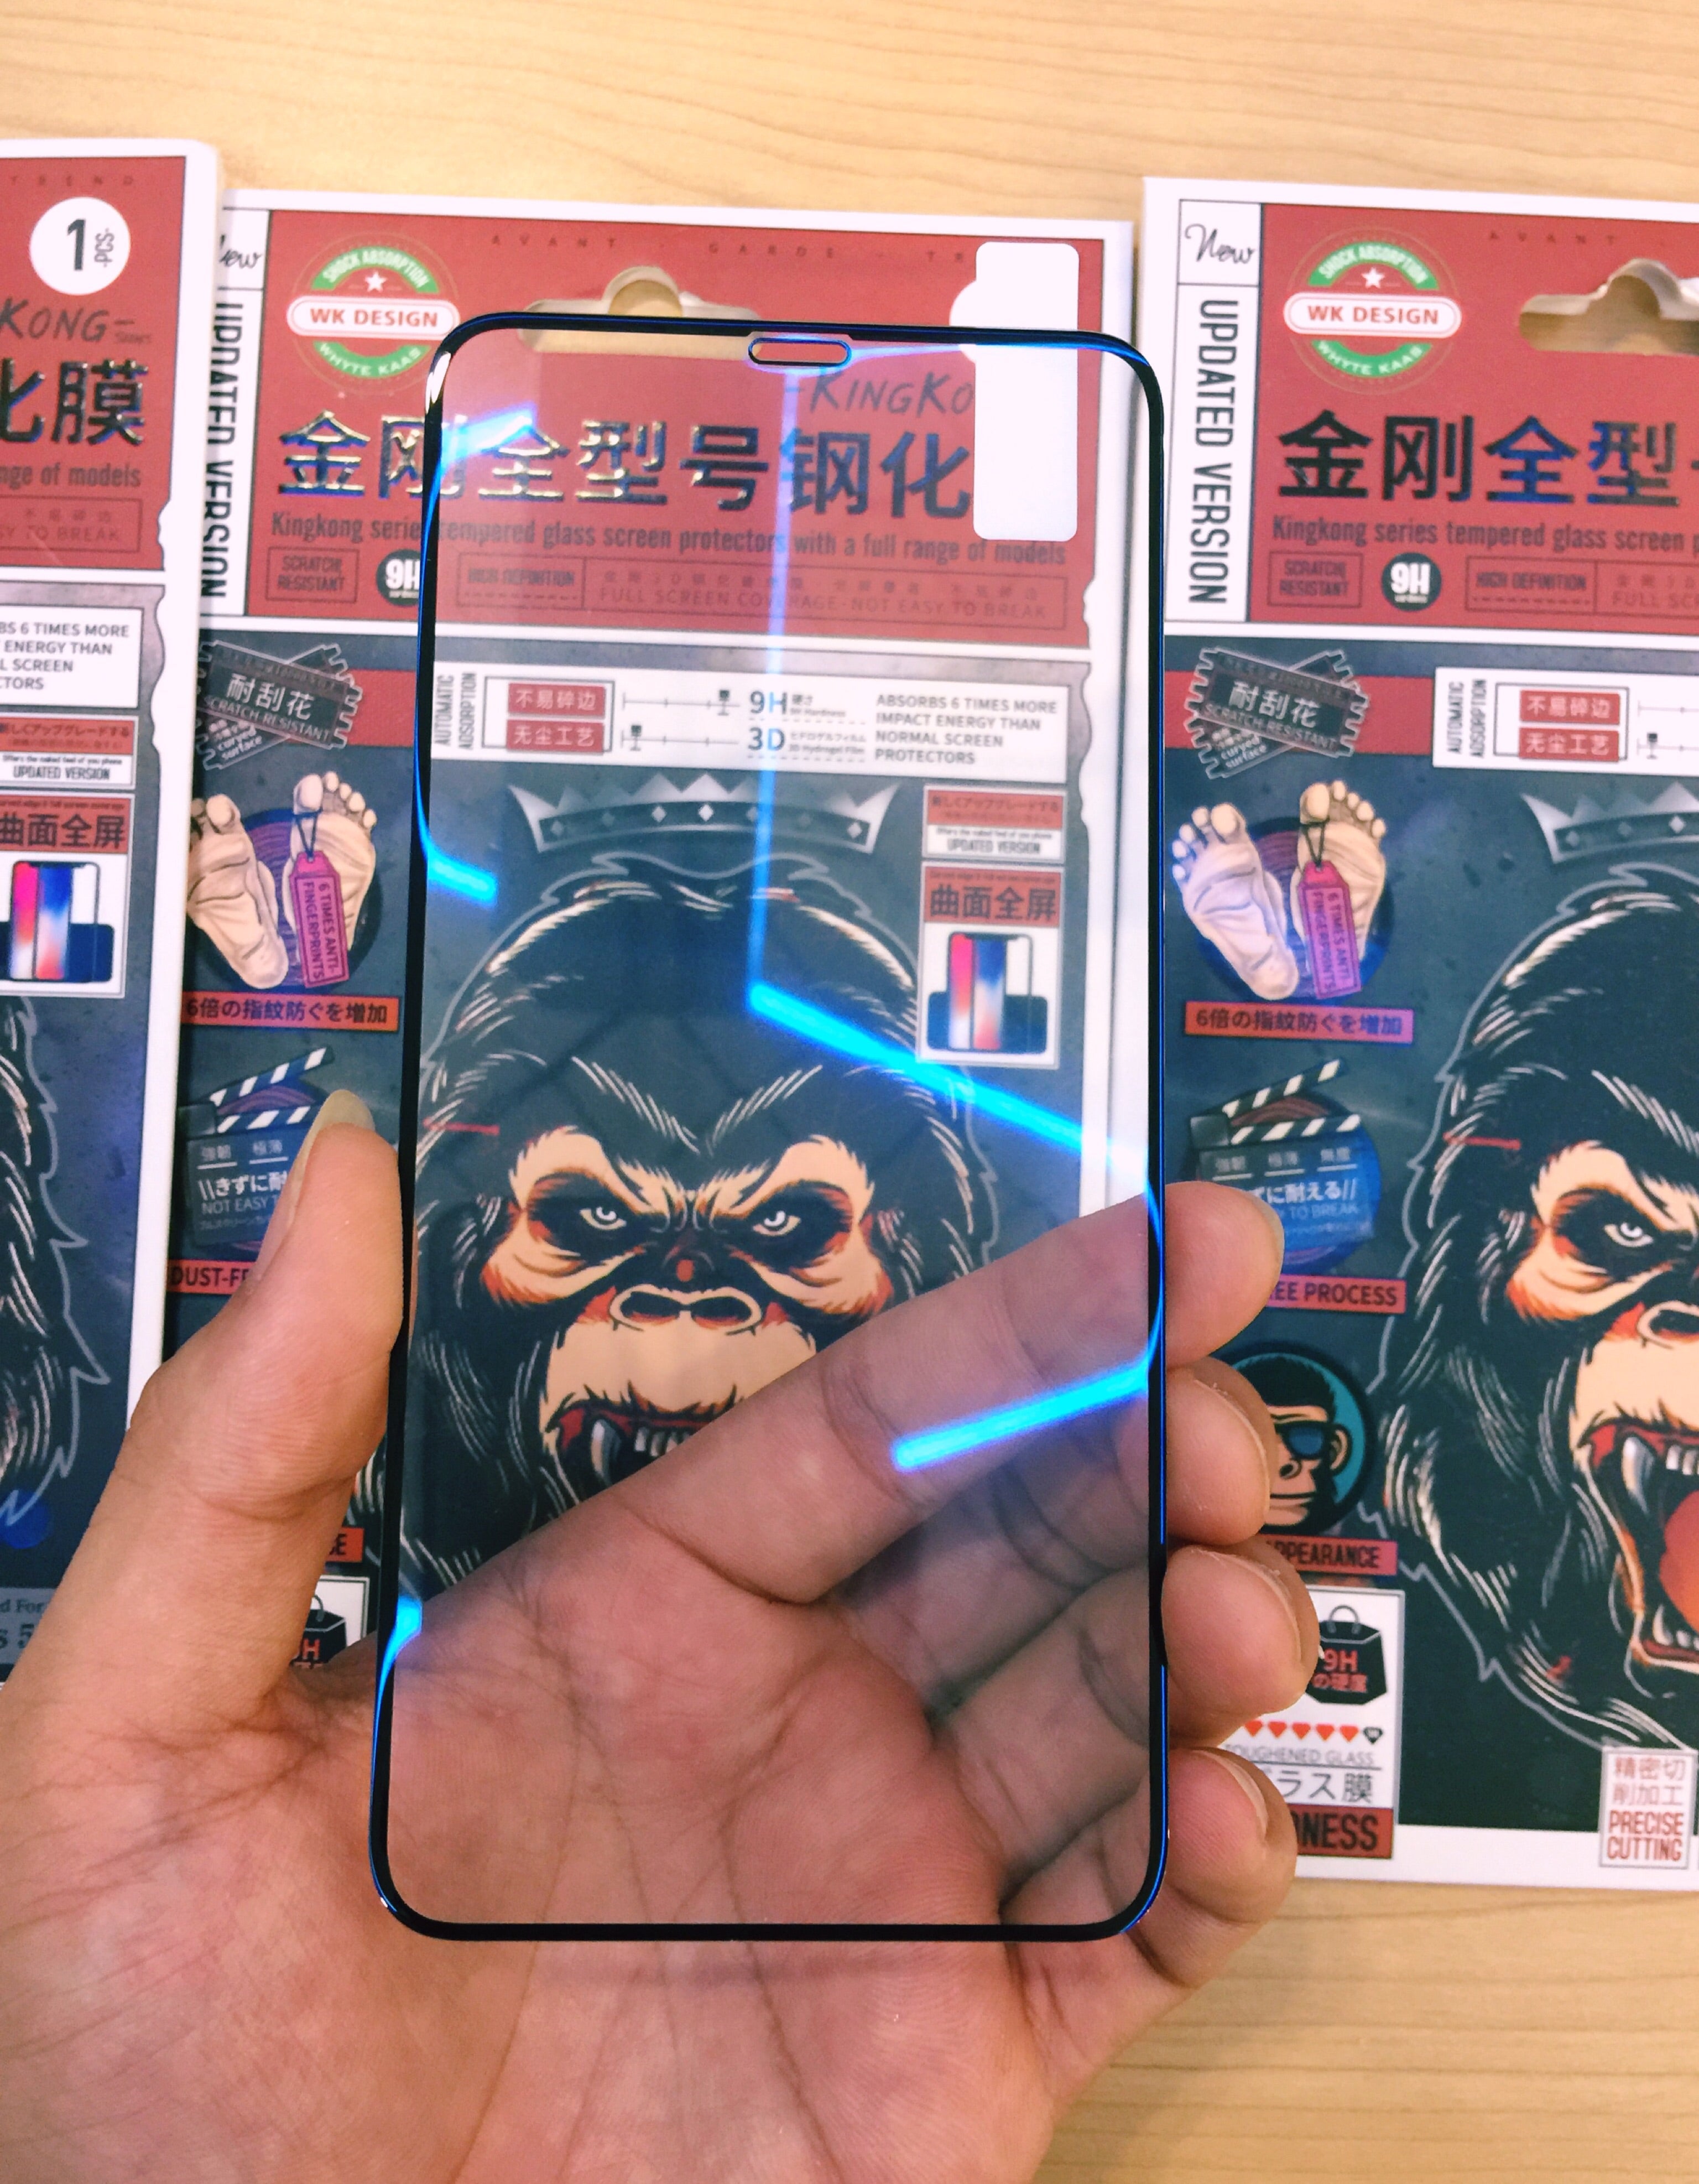 WTP-016 Kingkong Series tempered glass full Screen Protector for iphone